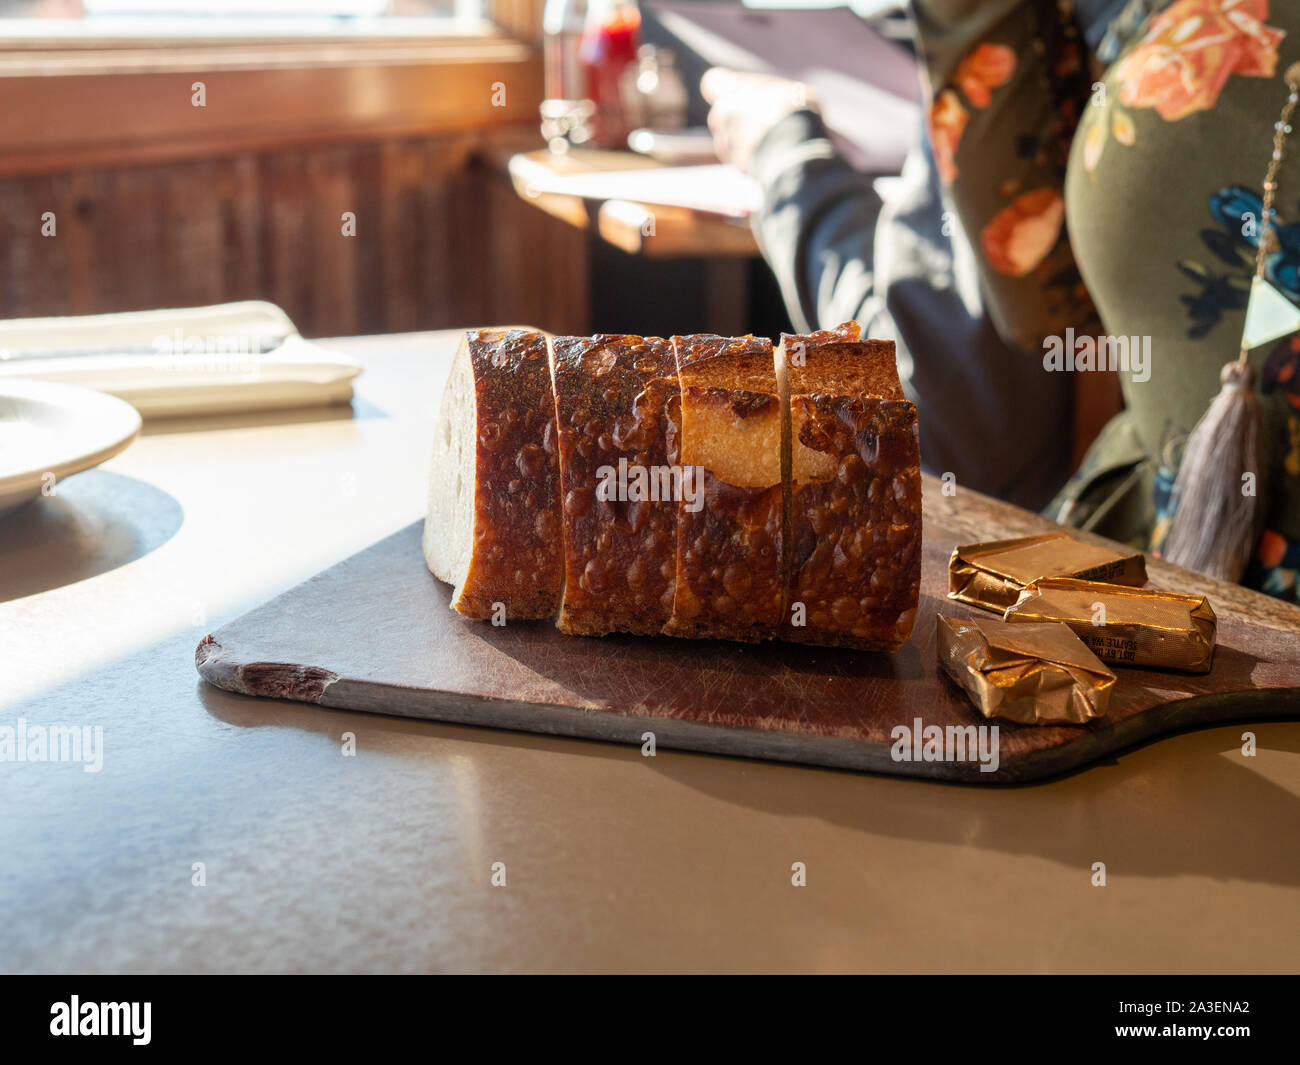 Bread and sticks of butter with carbs on a serving board at restaurant Stock Photo